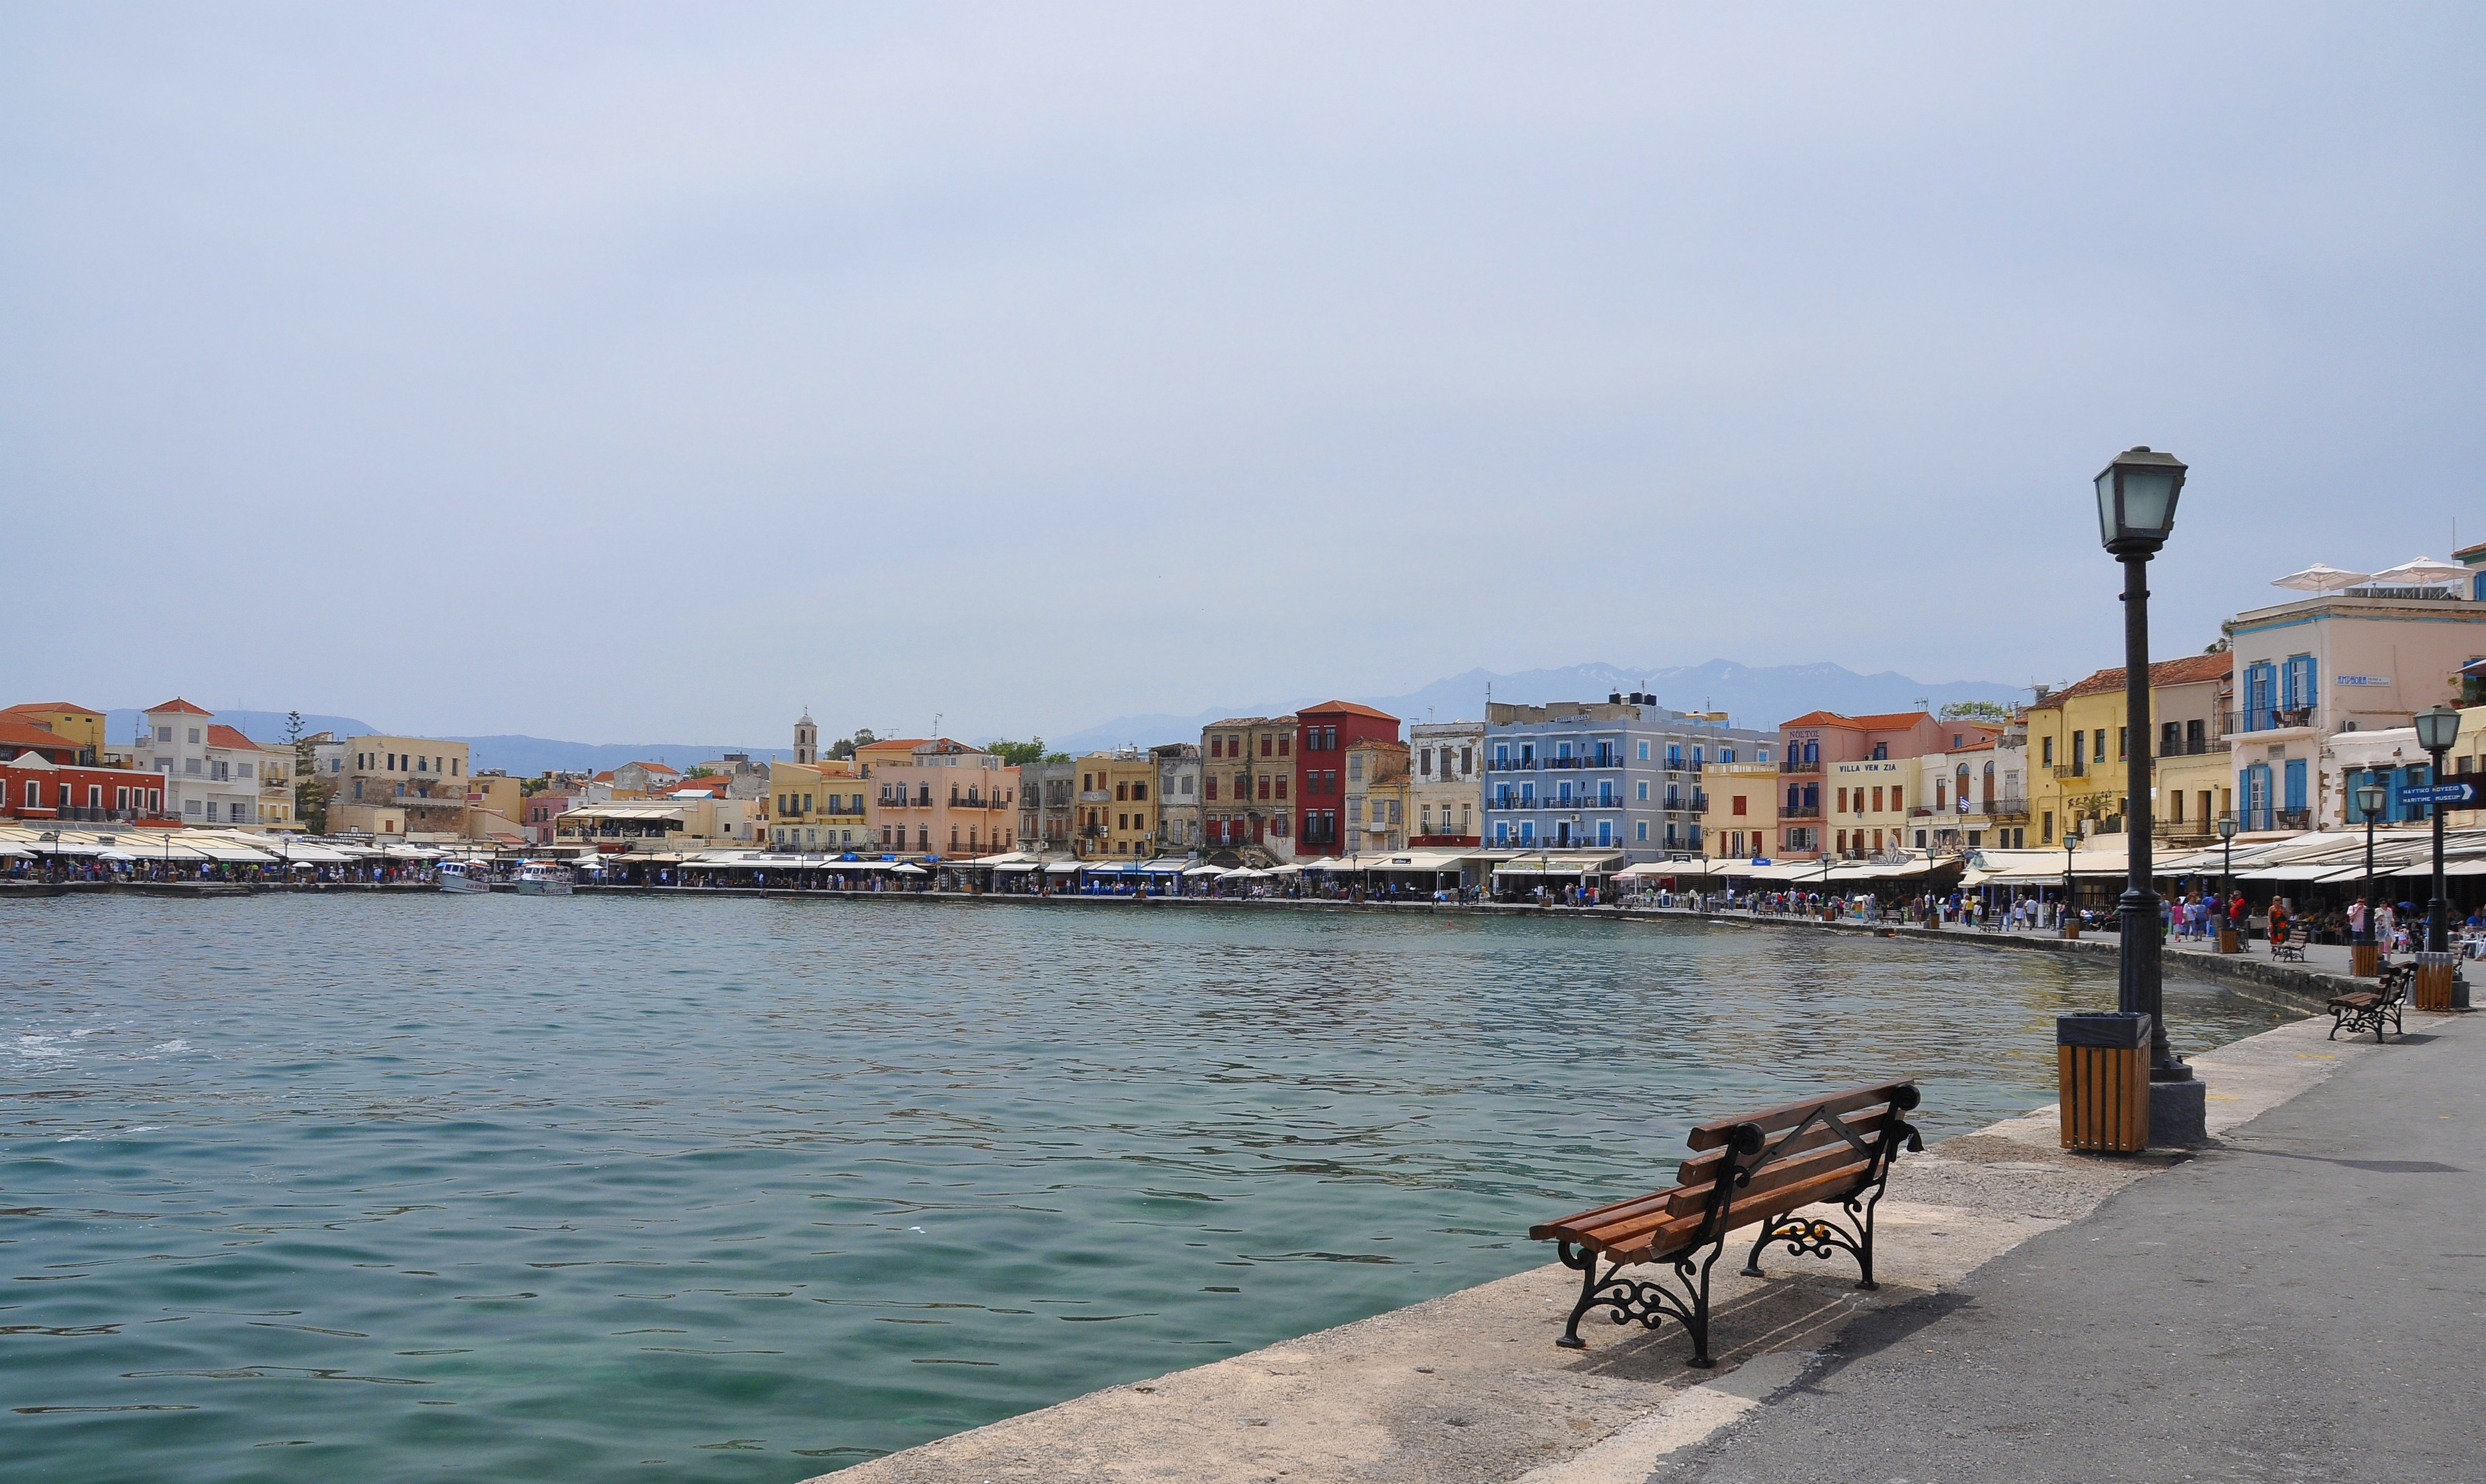 Chania Old Harbour in Crete, Greece 001